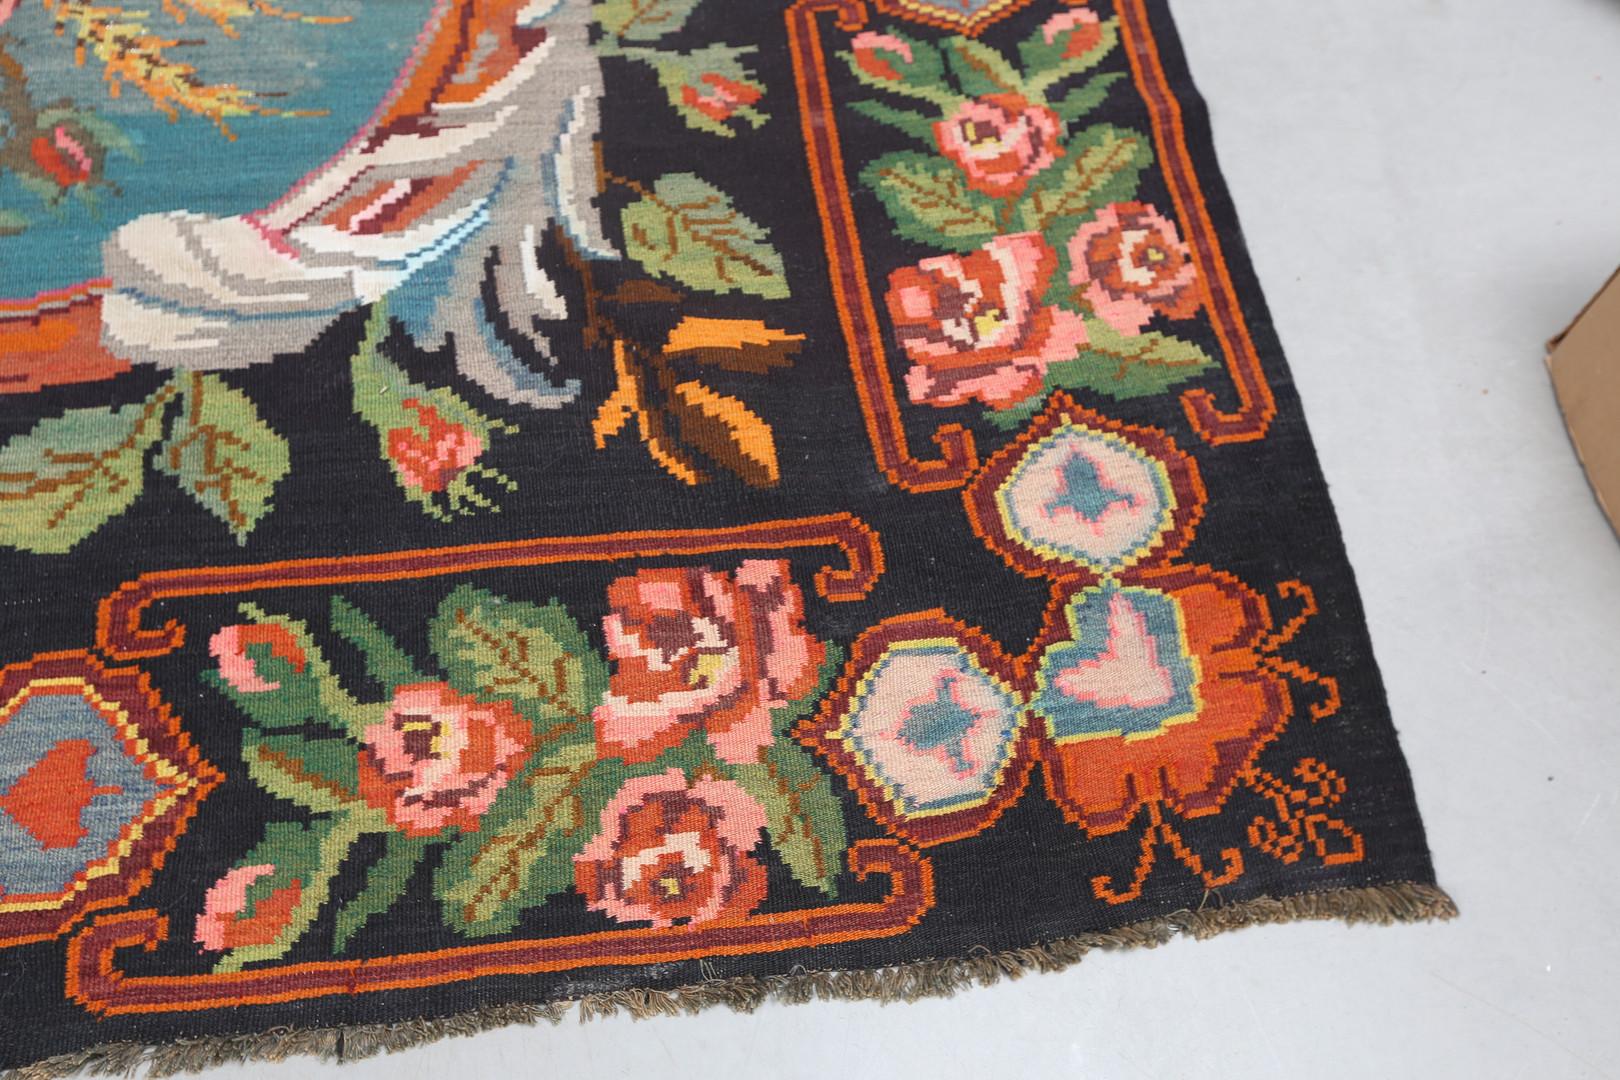 This luxurious antique floral rug is a Moldavian Kilim woven by hand in the 1940s. Elegantly woven roses flow through this design, woven asymmetrically to create a beautiful, eye-catching display. Featuring a deep brown background with green,